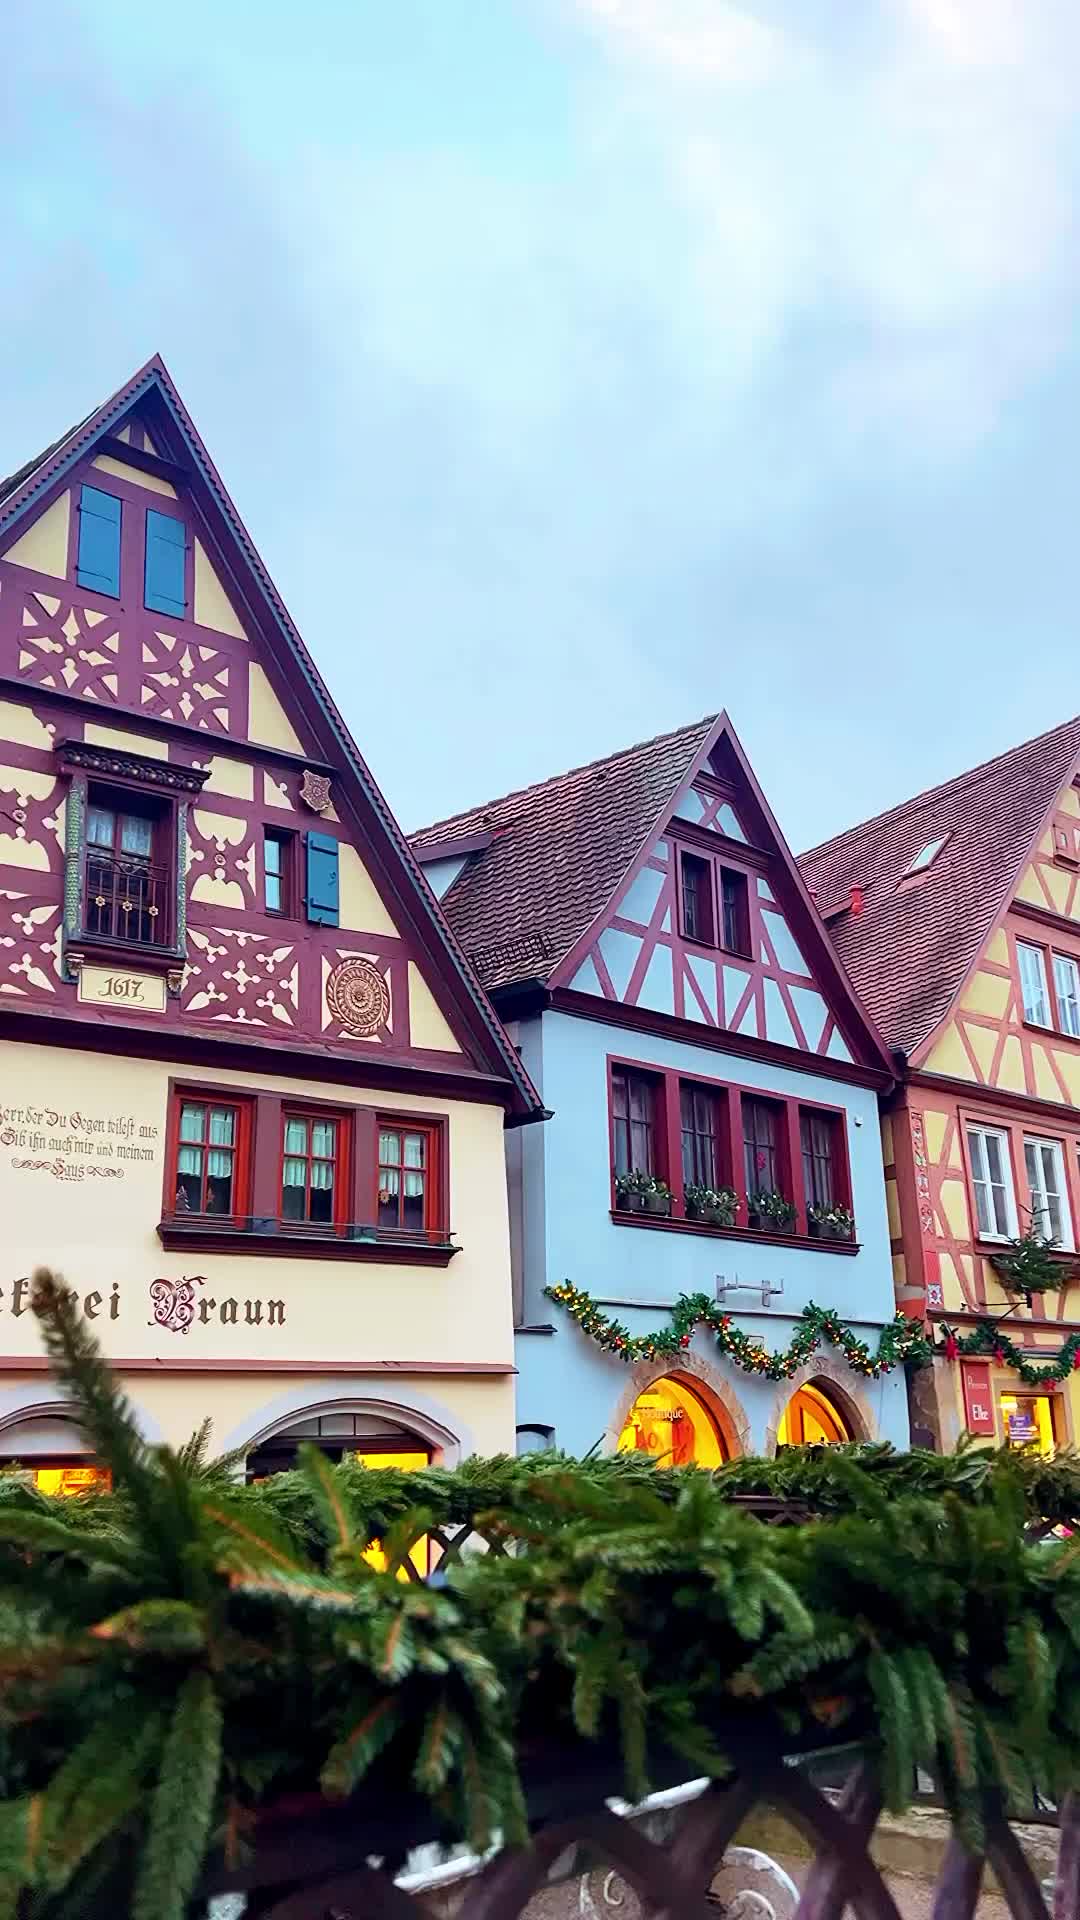 Discover Rothenburg: A Real-Life Fairytale Village